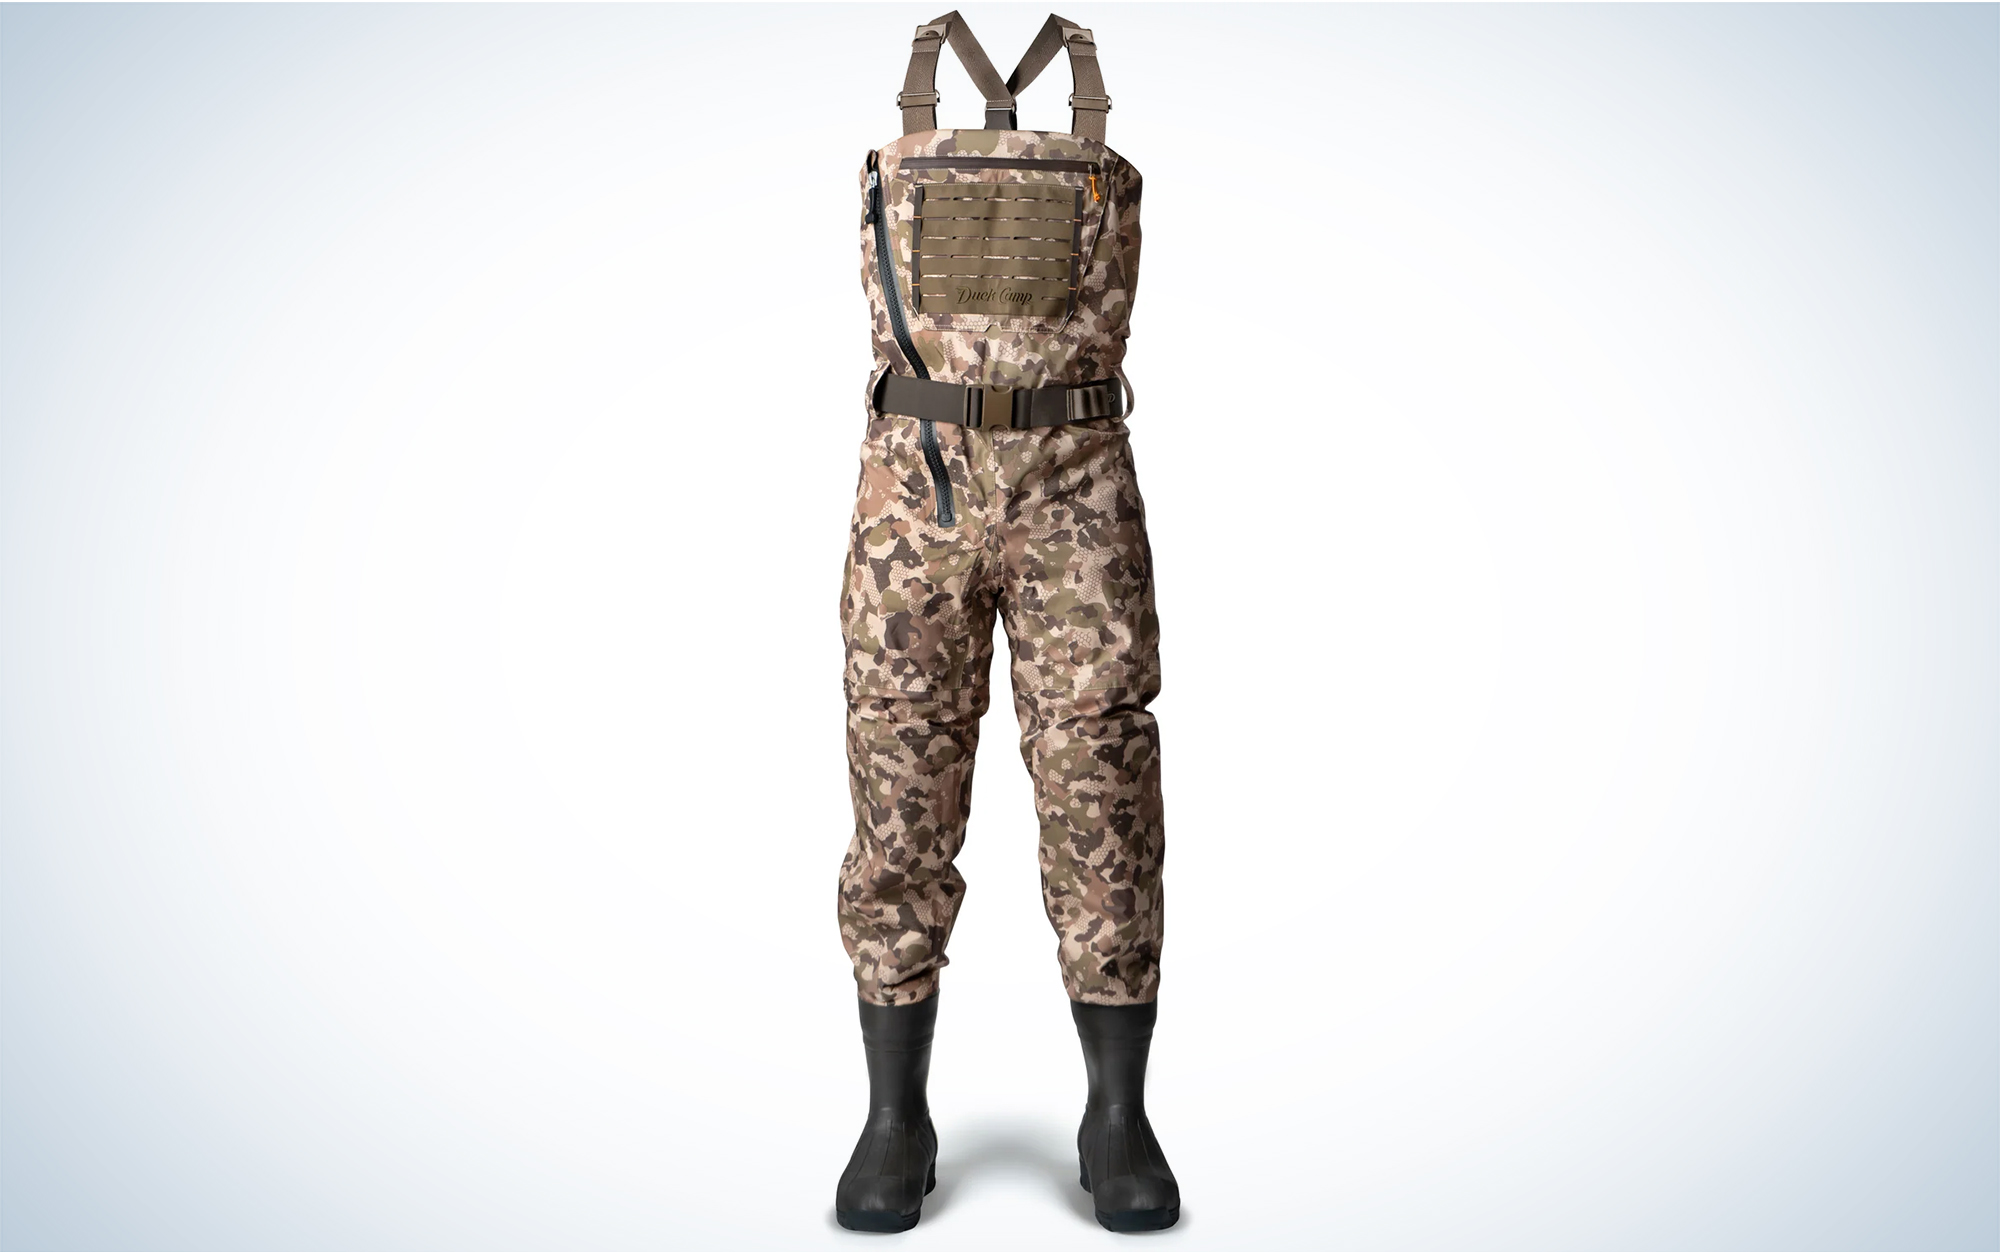 HISEA Chest Waders Neoprene Duck Hunting Waders for Men with